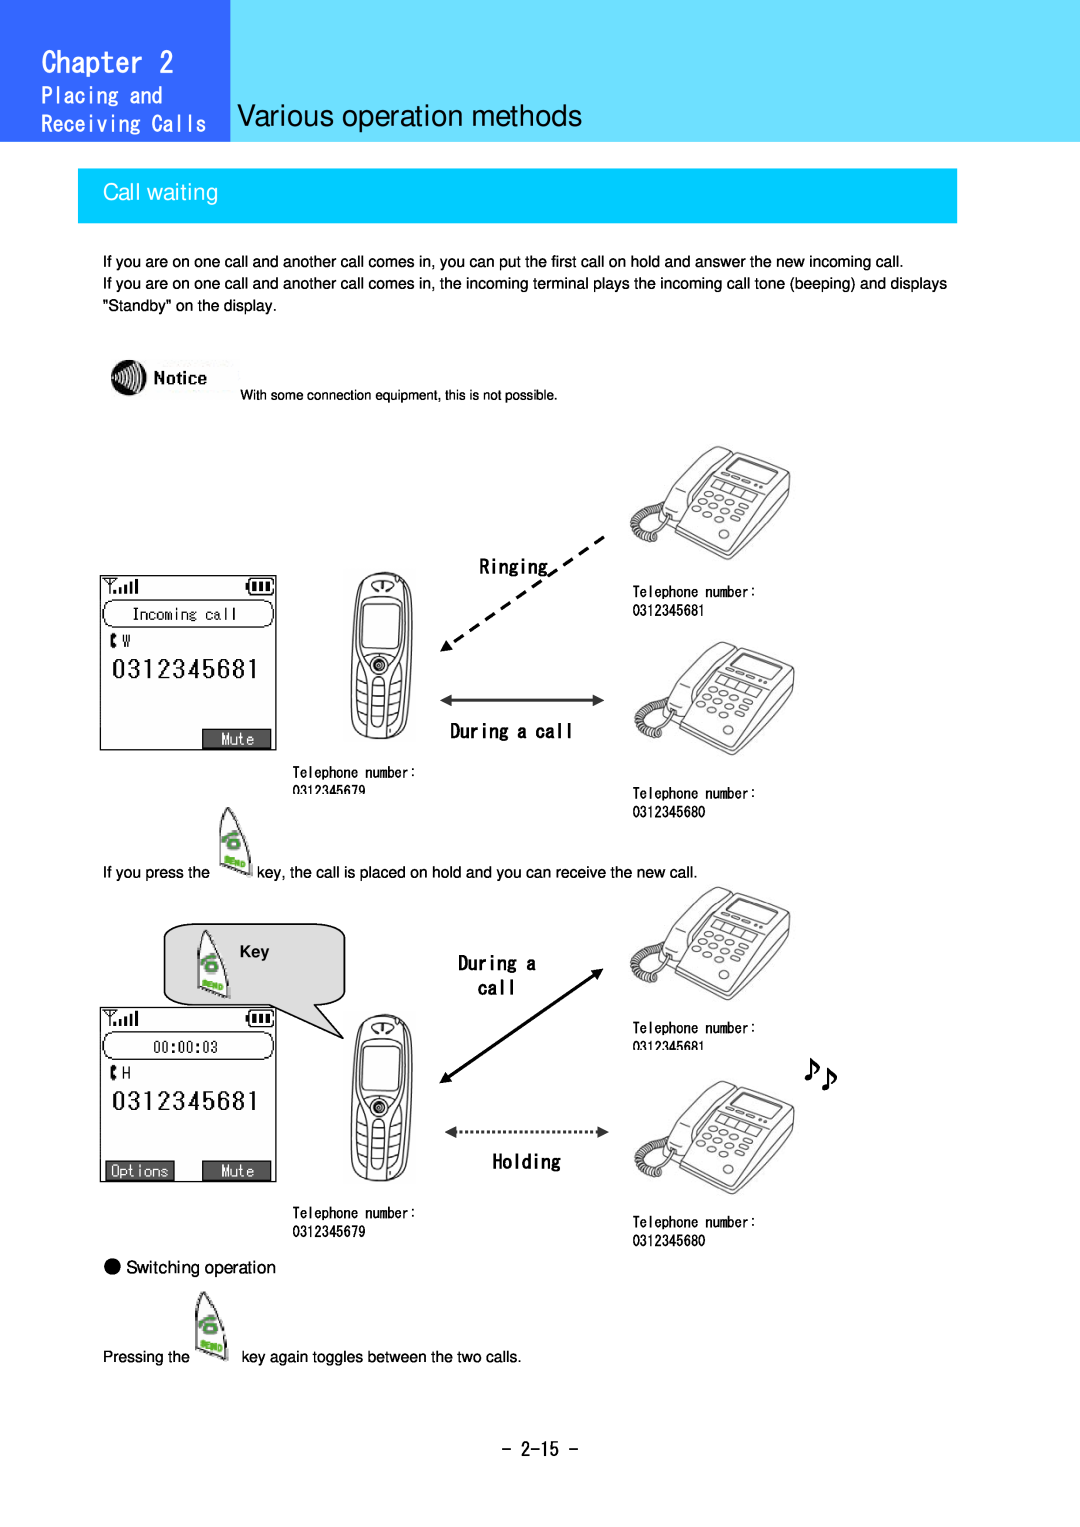 Hitachi 5000 user manual Receiving Calls Various operation methods, Call waiting, Ringing, During a call, Holding, Chapter 